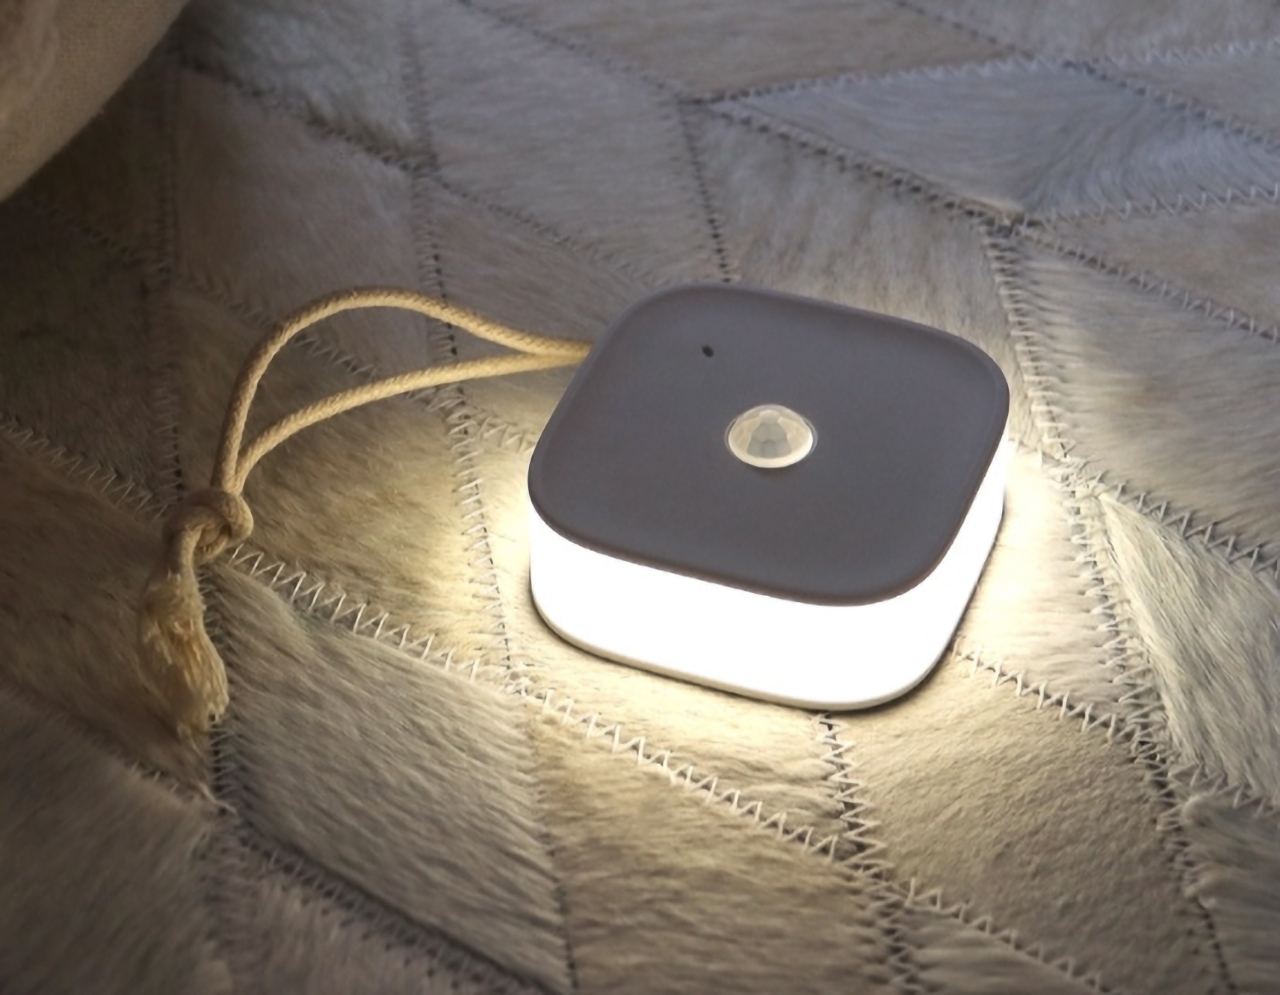 Wireless night light with motion sensor for $ 12